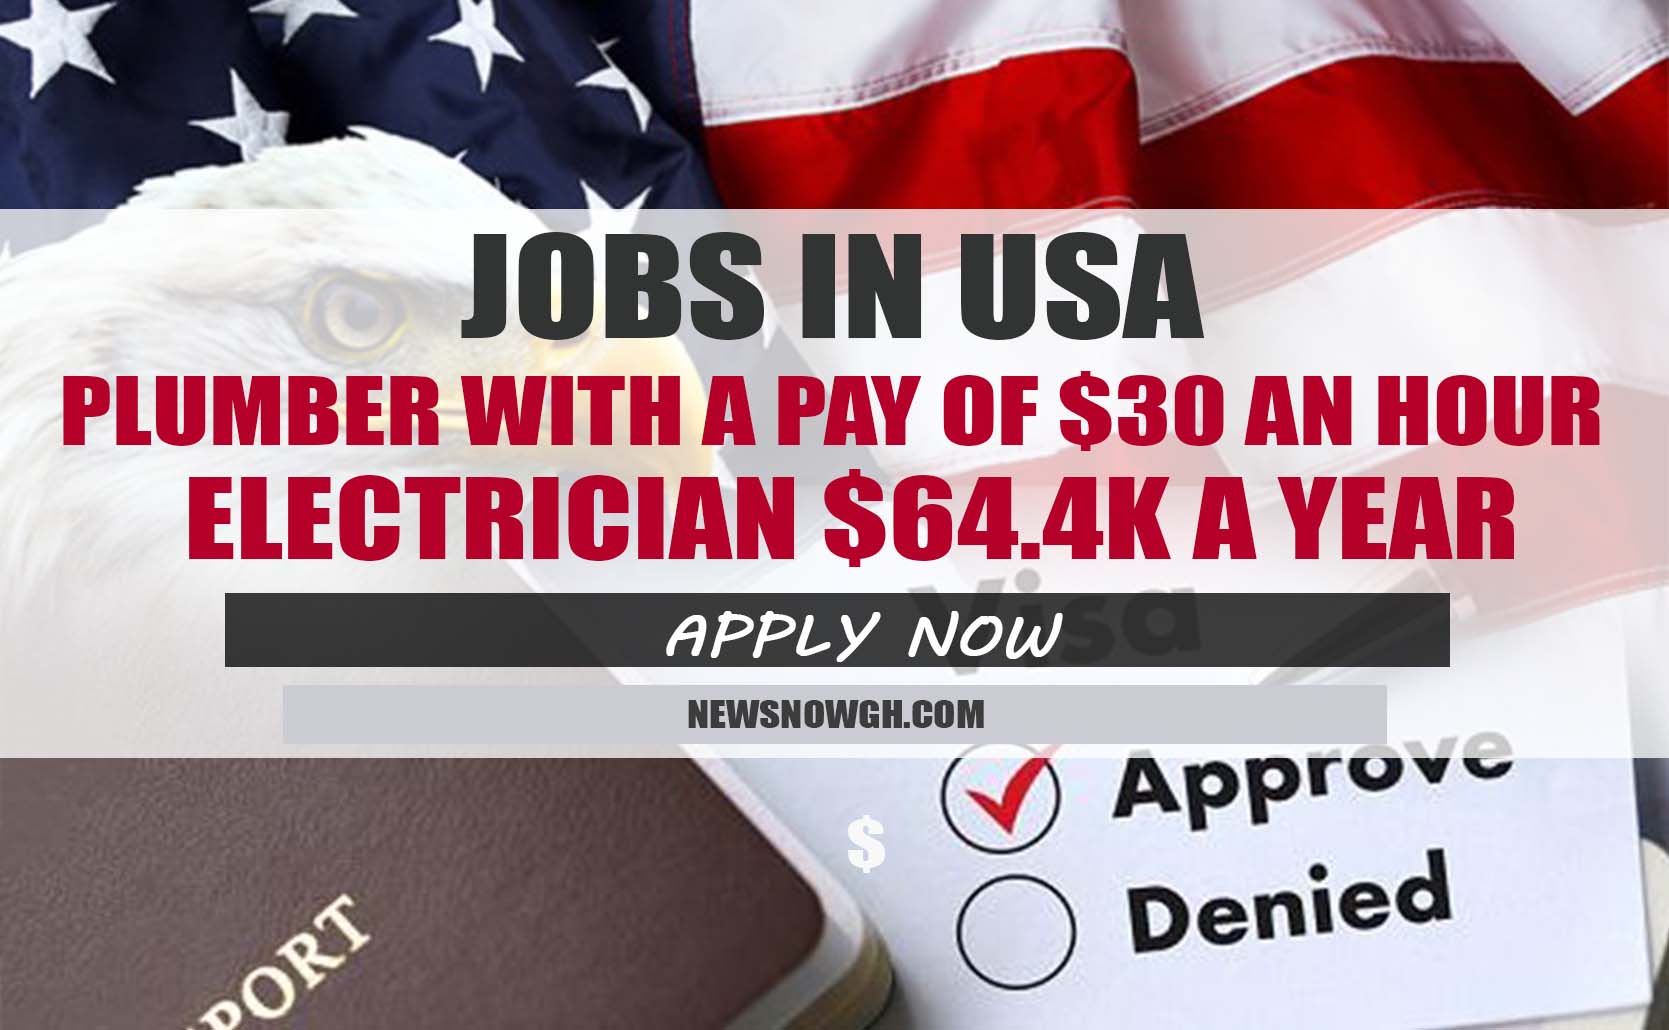 JOBS IN USA Plumber with a pay of 30 an hour and Electrician 64.4K a